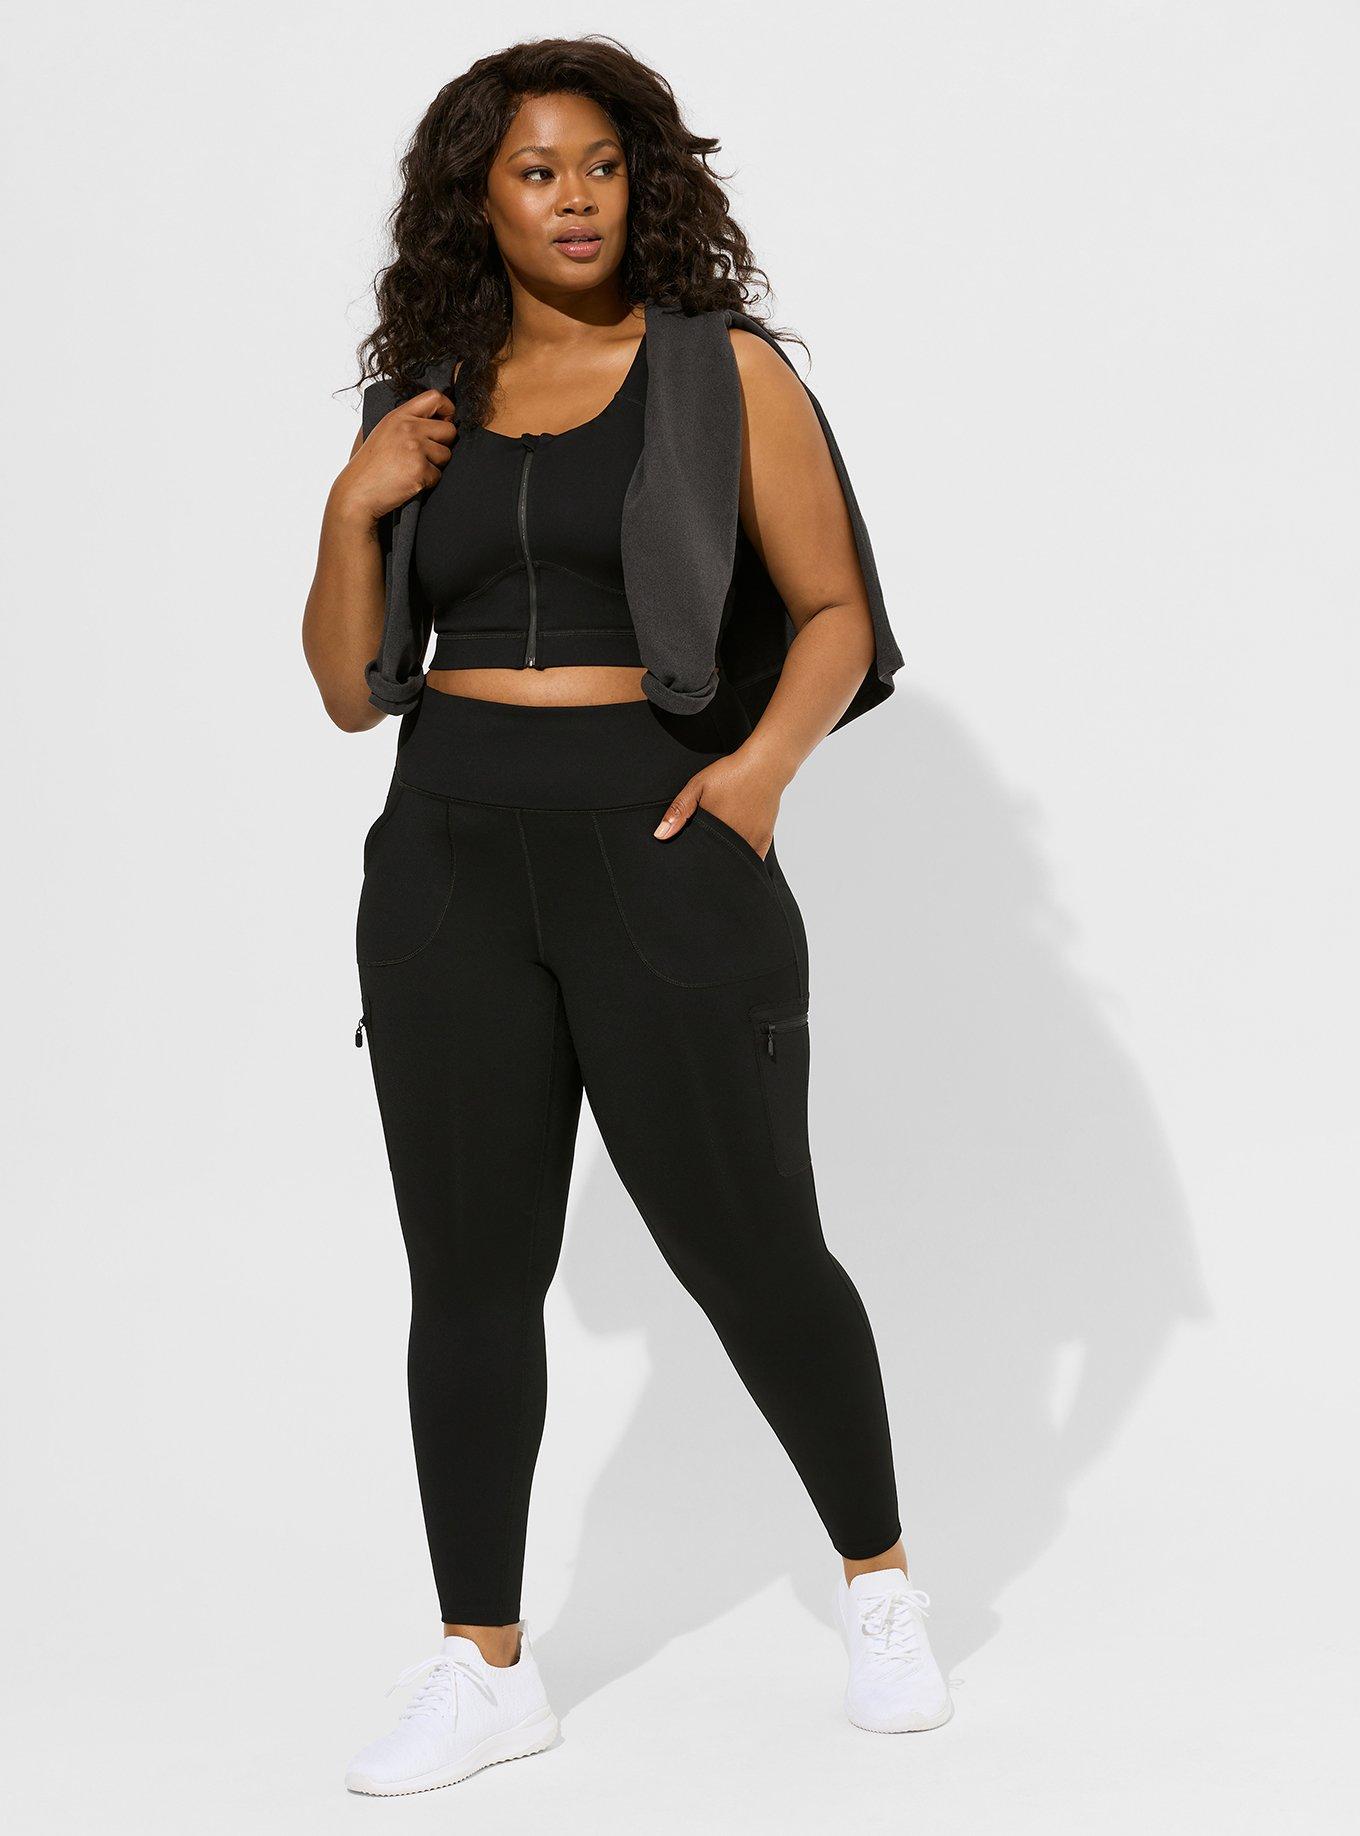 Plus Size - Happy Camper Performance Core Full Length Active